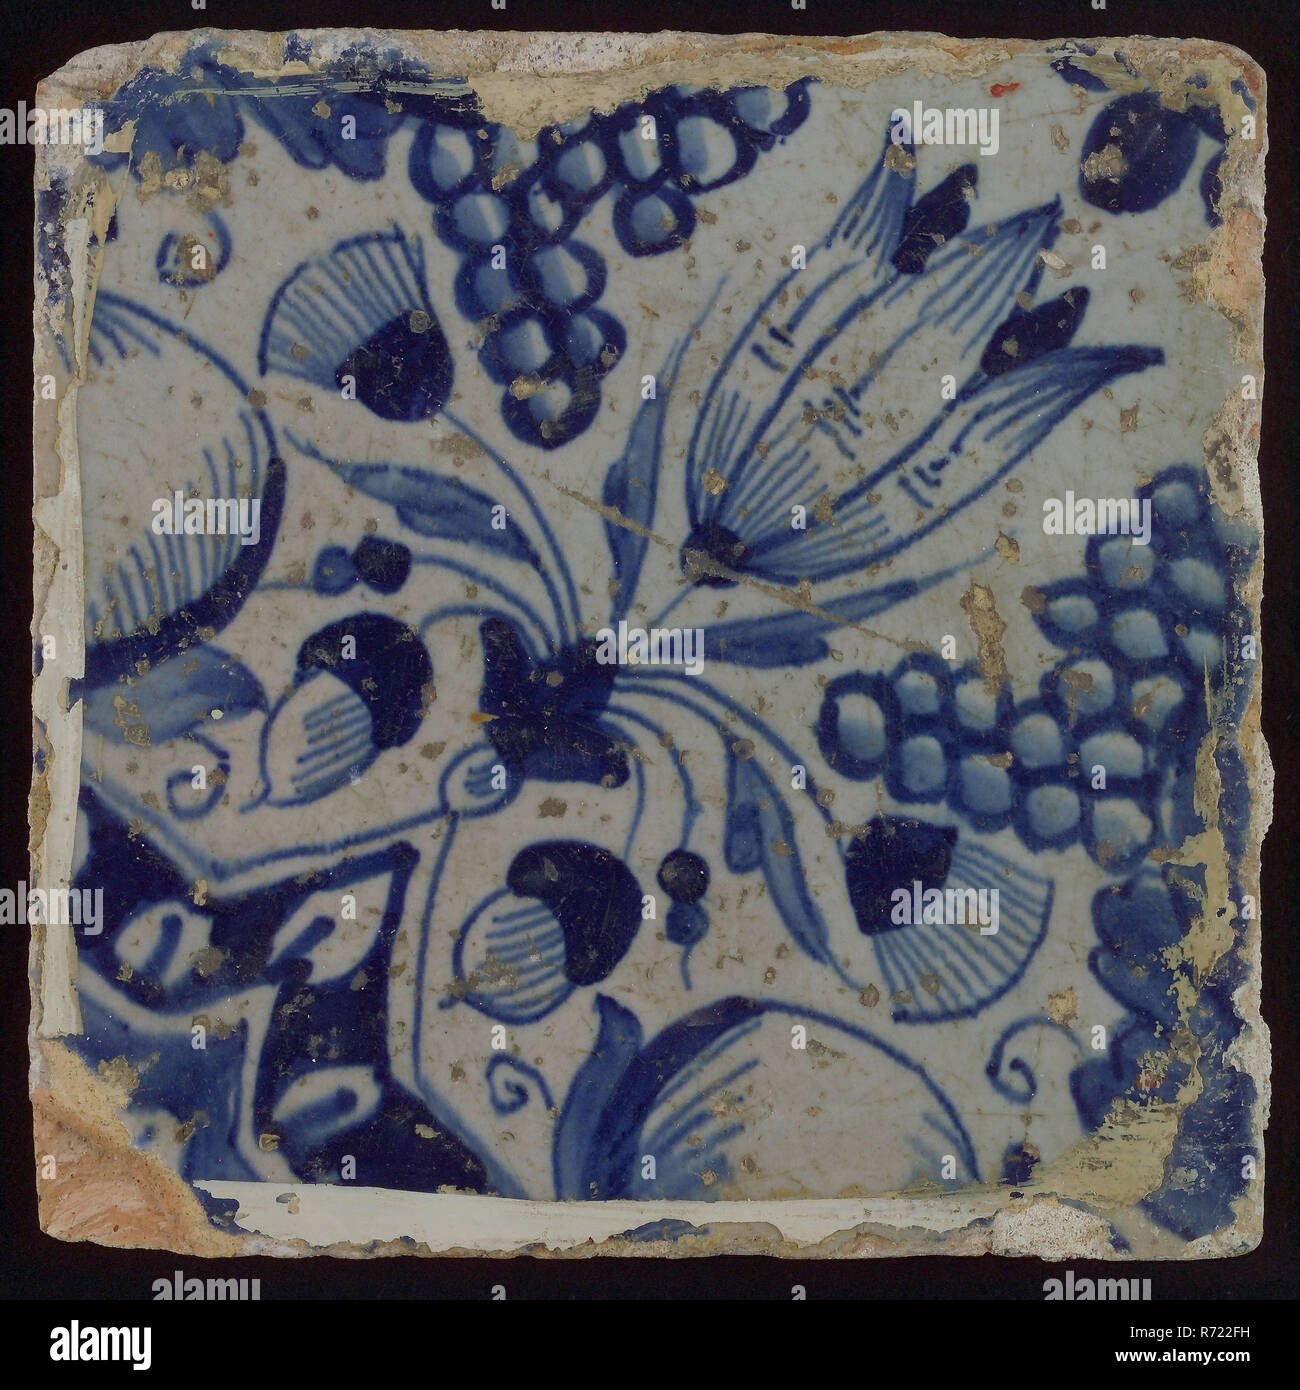 Ornament tile, star tulip with half bunch of grapes and half orange apple, corner pattern quartz and quarter rosette, wall tile tile sculpture ceramics pottery glaze, baked 2x glazed painted Ragged shard square Four nail holes. Two-tone: blue on white Bellevue Rotterdam Hillegersberg-Schiebroek Hillegersberg Zuid Kleiweg Originating from former Huize Bellevue Kleiweg 427 Rotterdam. Stock Photo